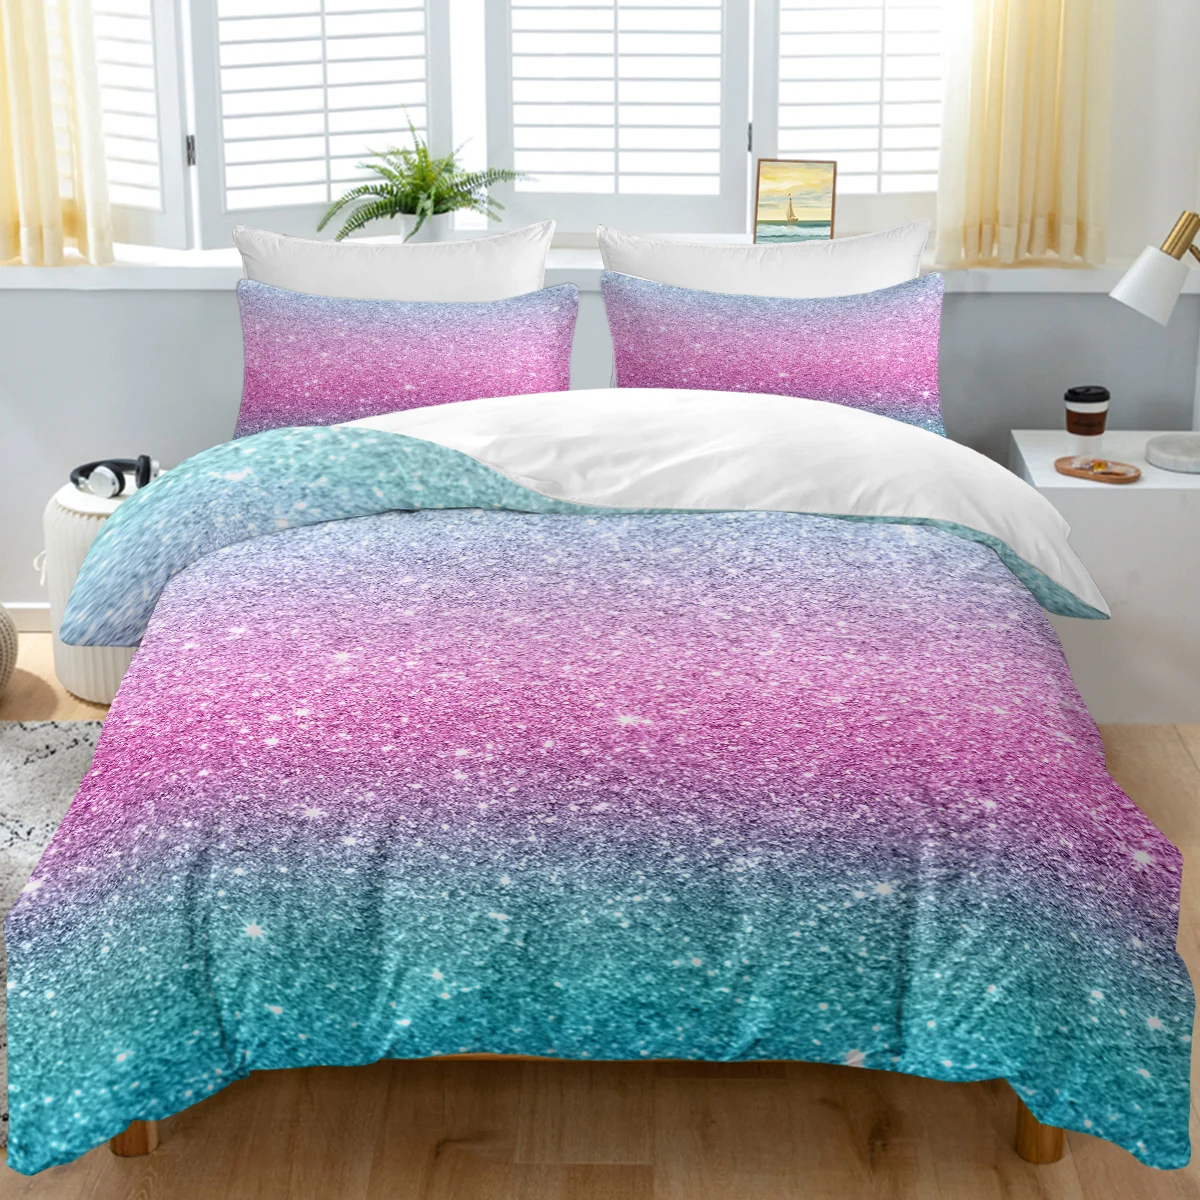 

3pc Romantic Pink and Blue Glistening Light Design Bedding Set with Zipper Closure 1 Duvet Cover and 2 Pillow Cases